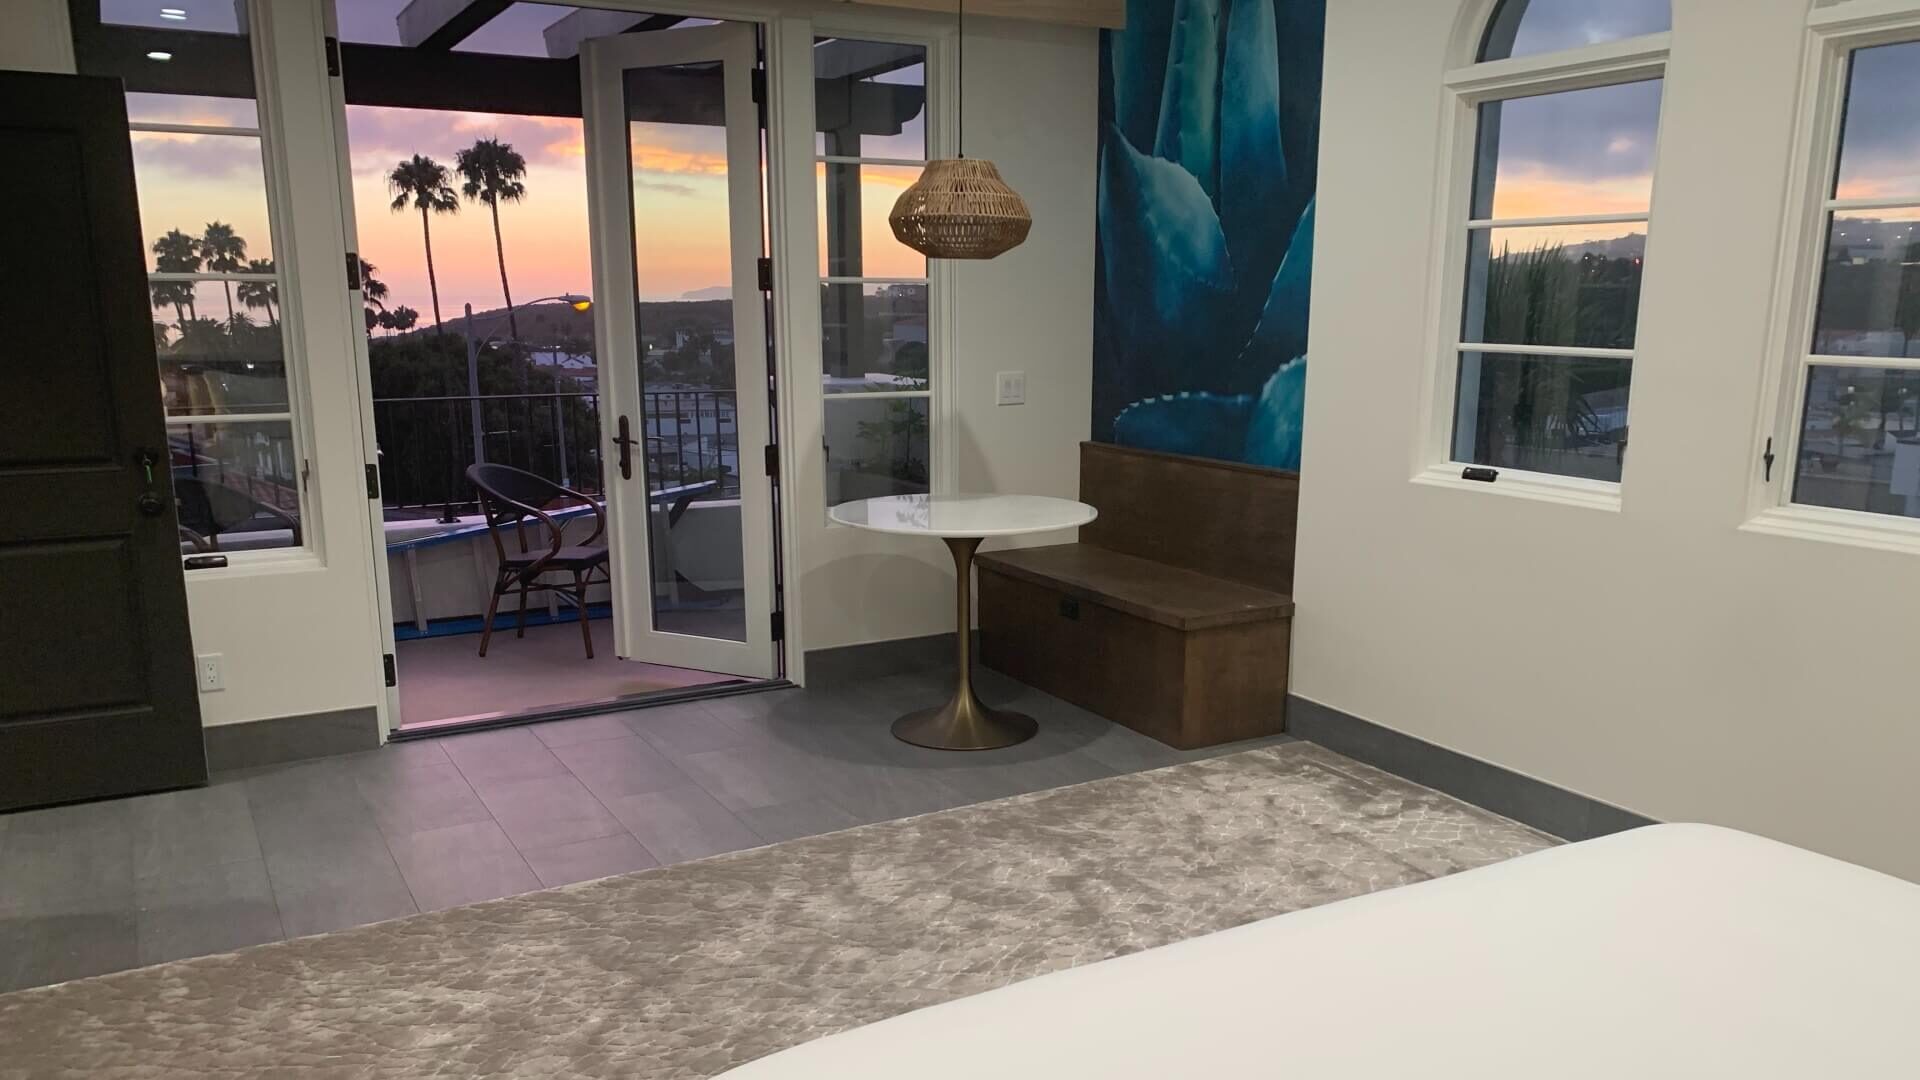 Large bedroom with French doors leading to outdoor patio with views of palm trees and a sunset sky